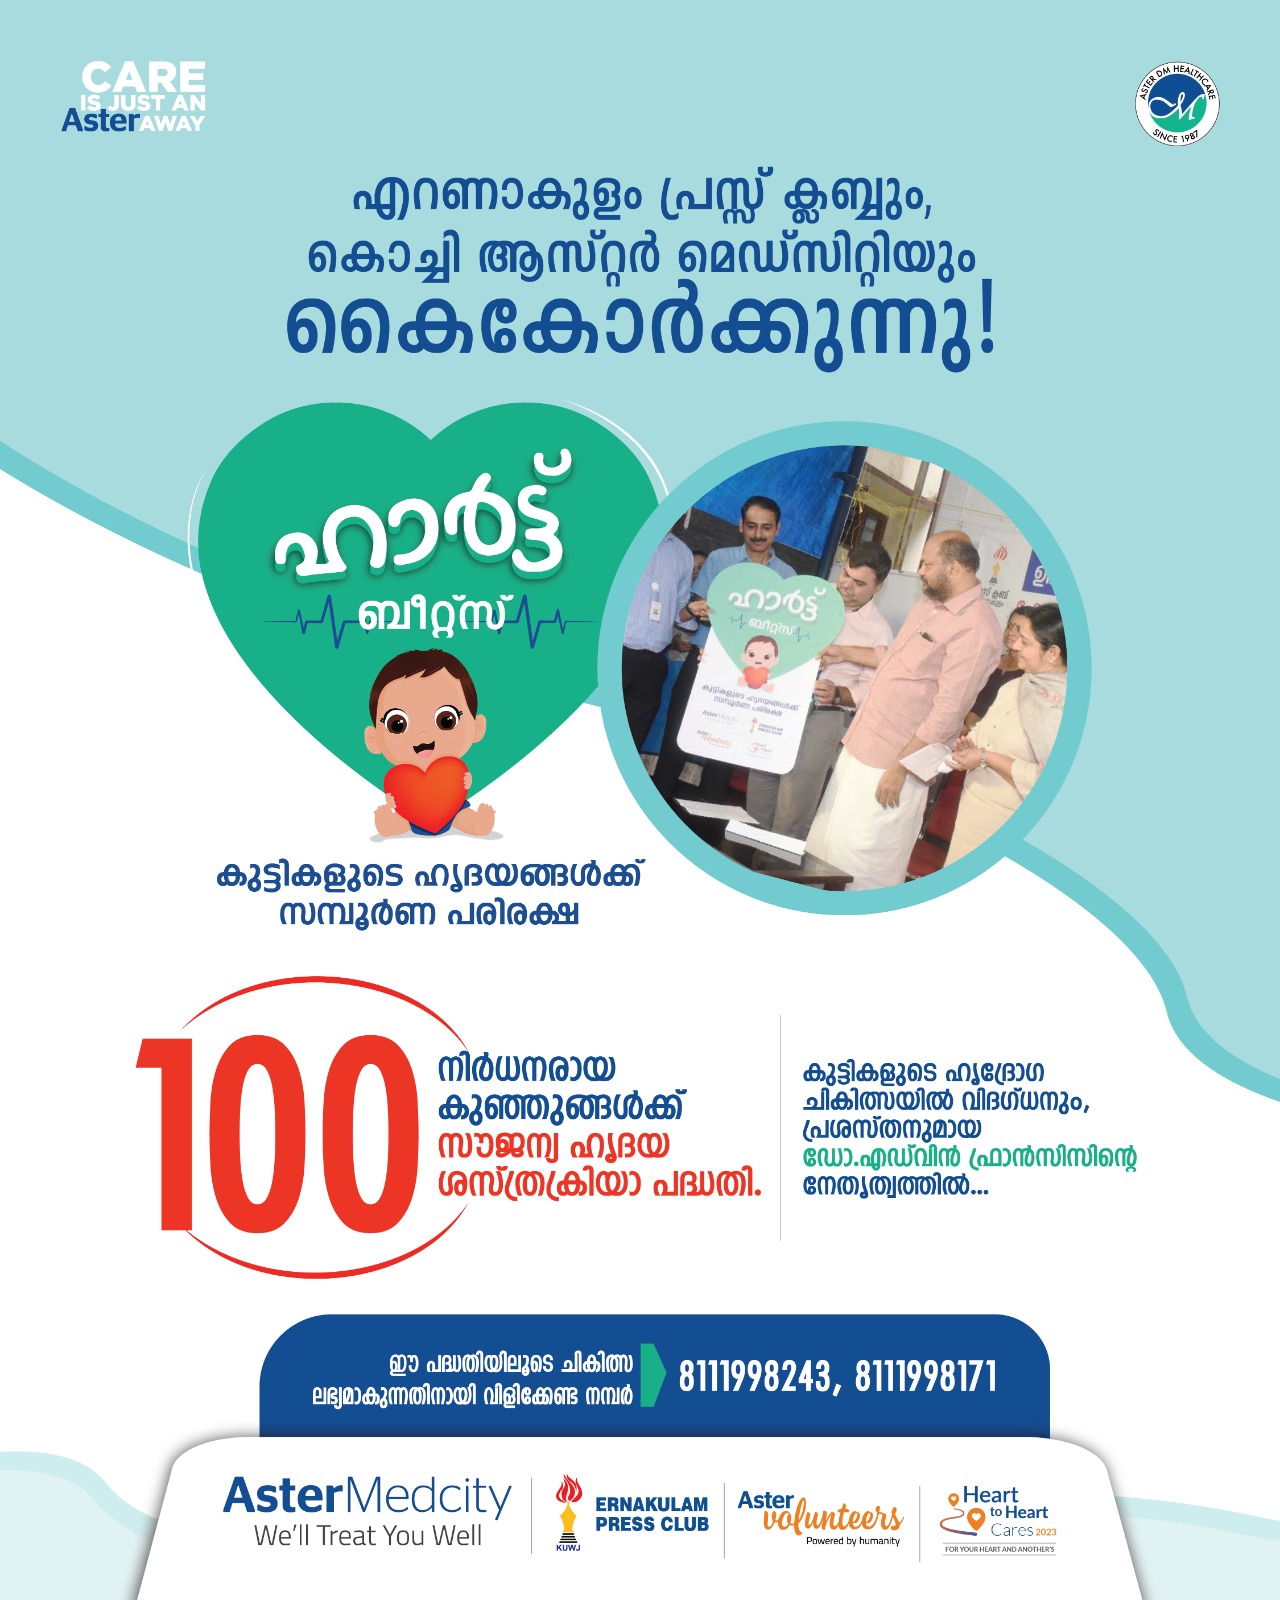 Aster Medcity, in Association with the Ernakulam Press Club, Launches ‘Heart Beats’: Providing 100 Paediatric Cardiac Surgeries for Underprivileged Children